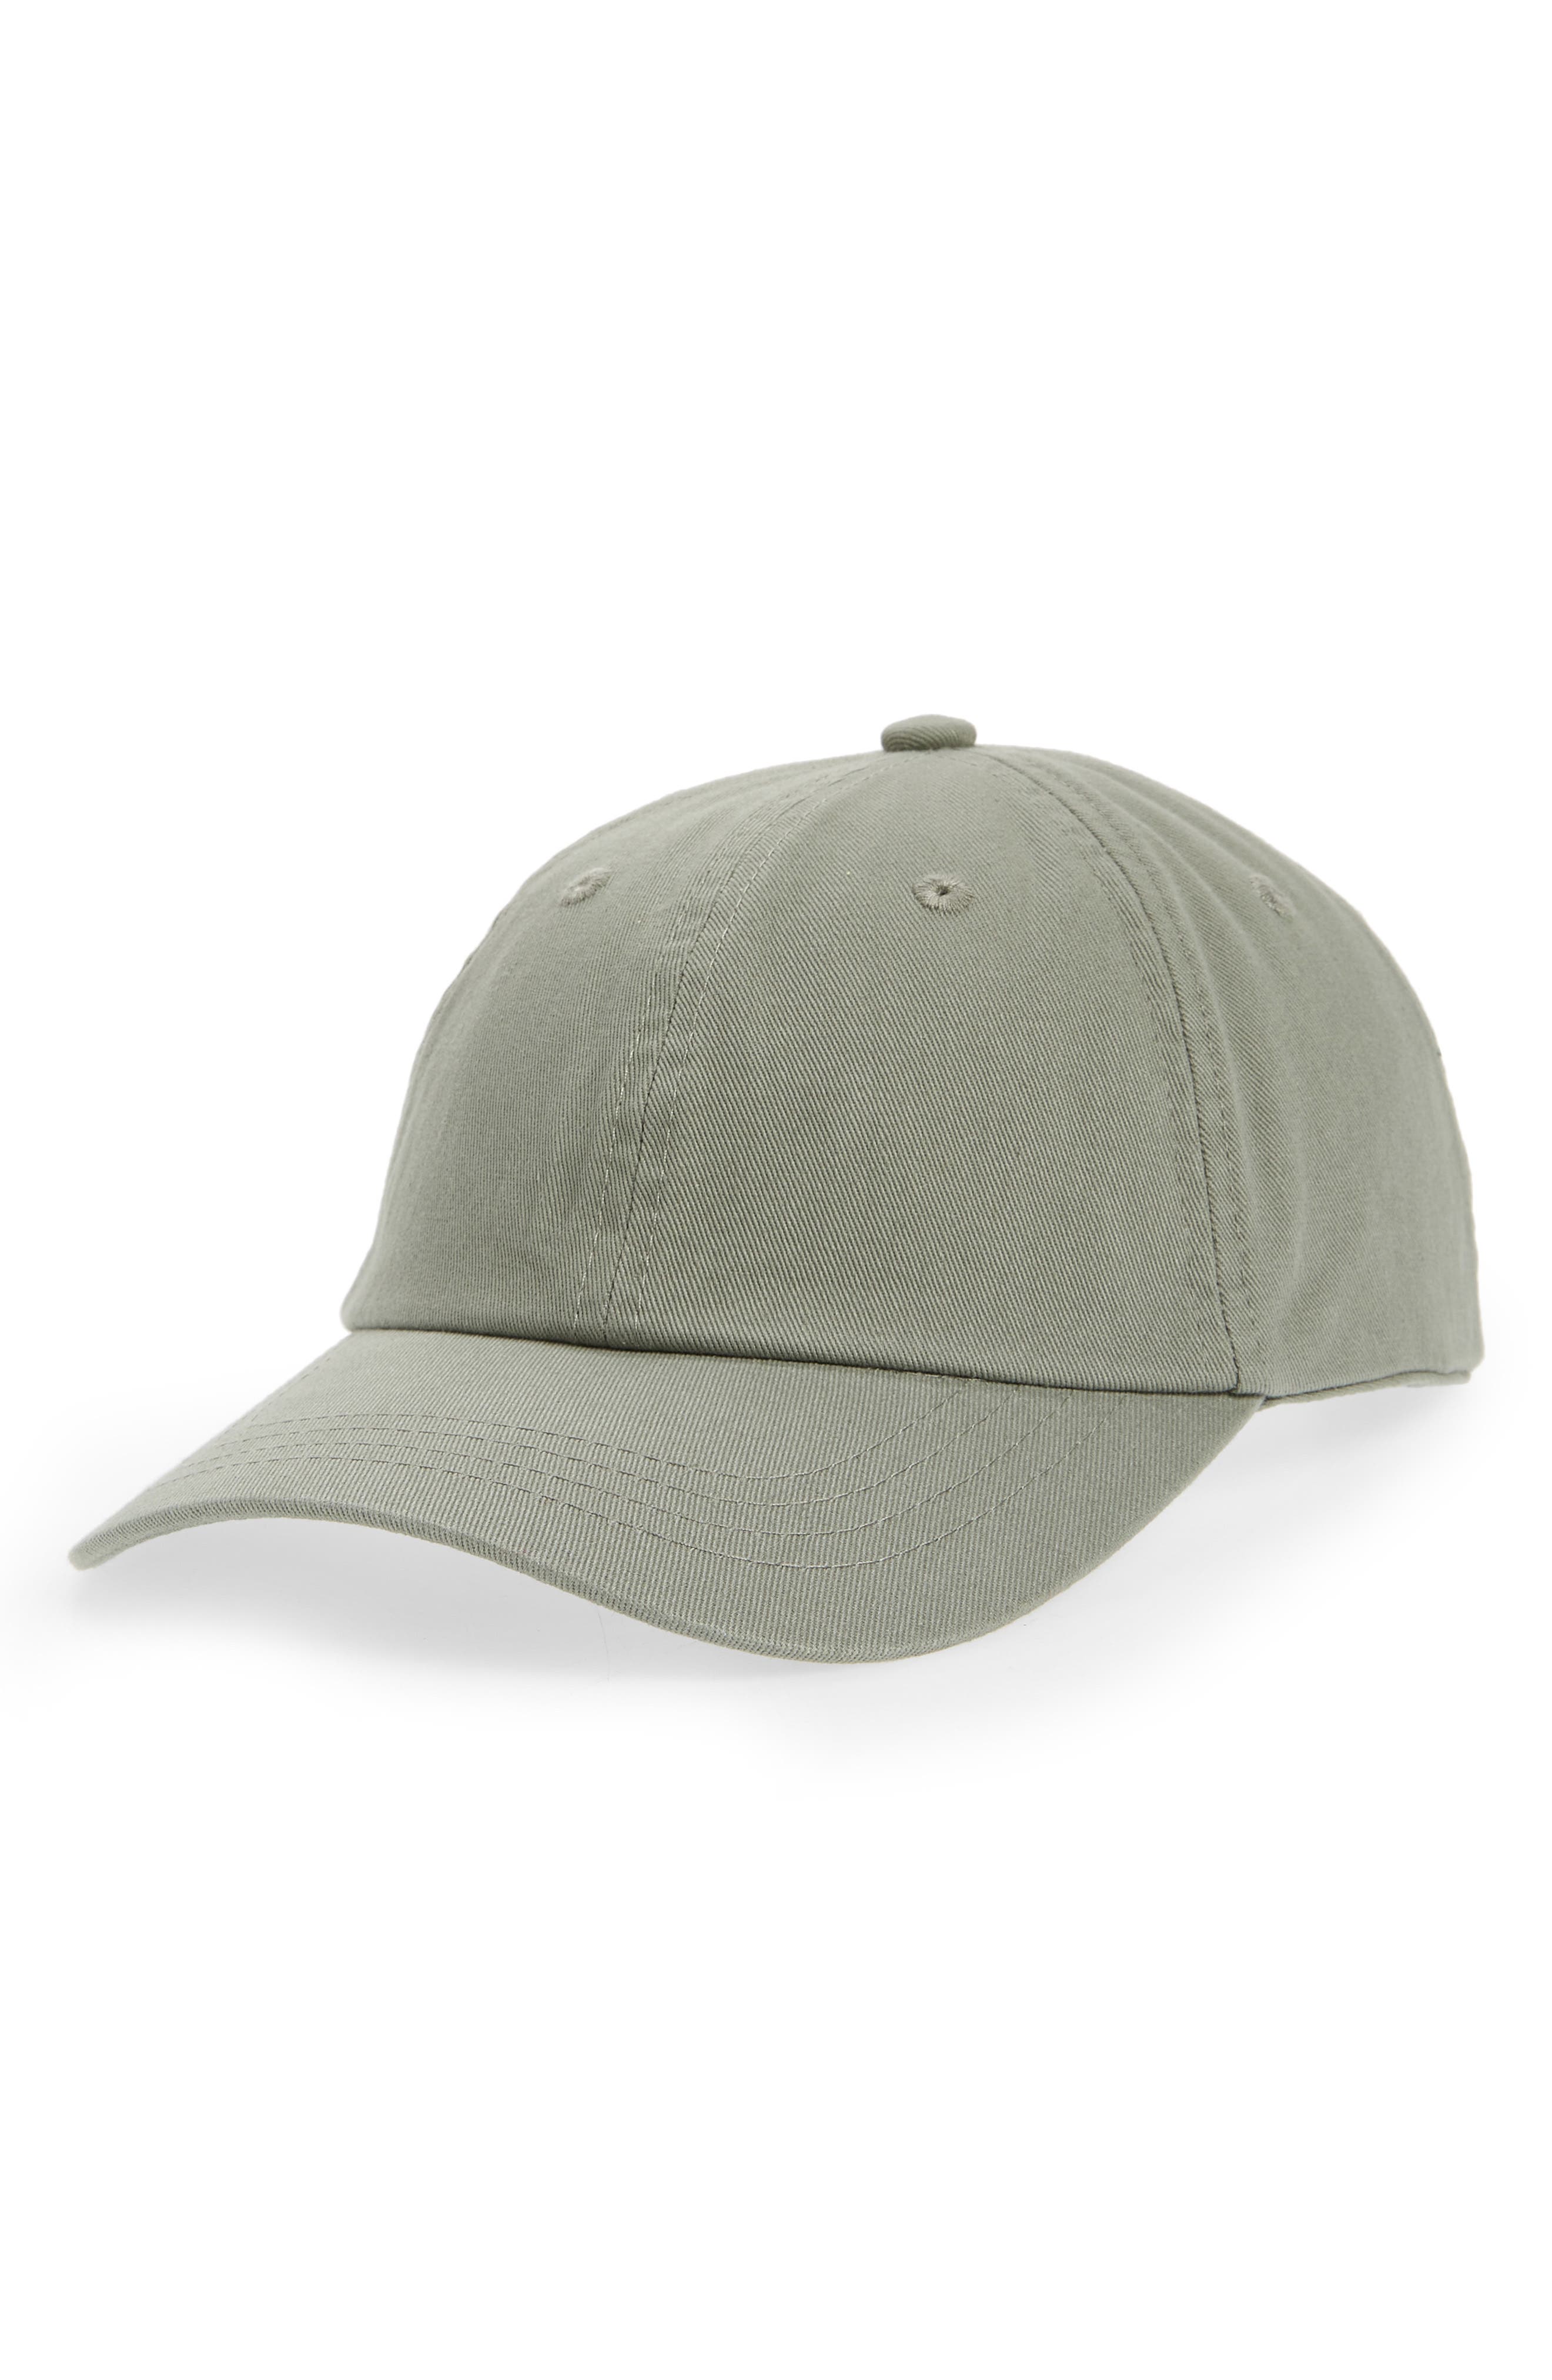 Acne Studios Logo Embroidered Baseball Cap in Sage Green at Nordstrom